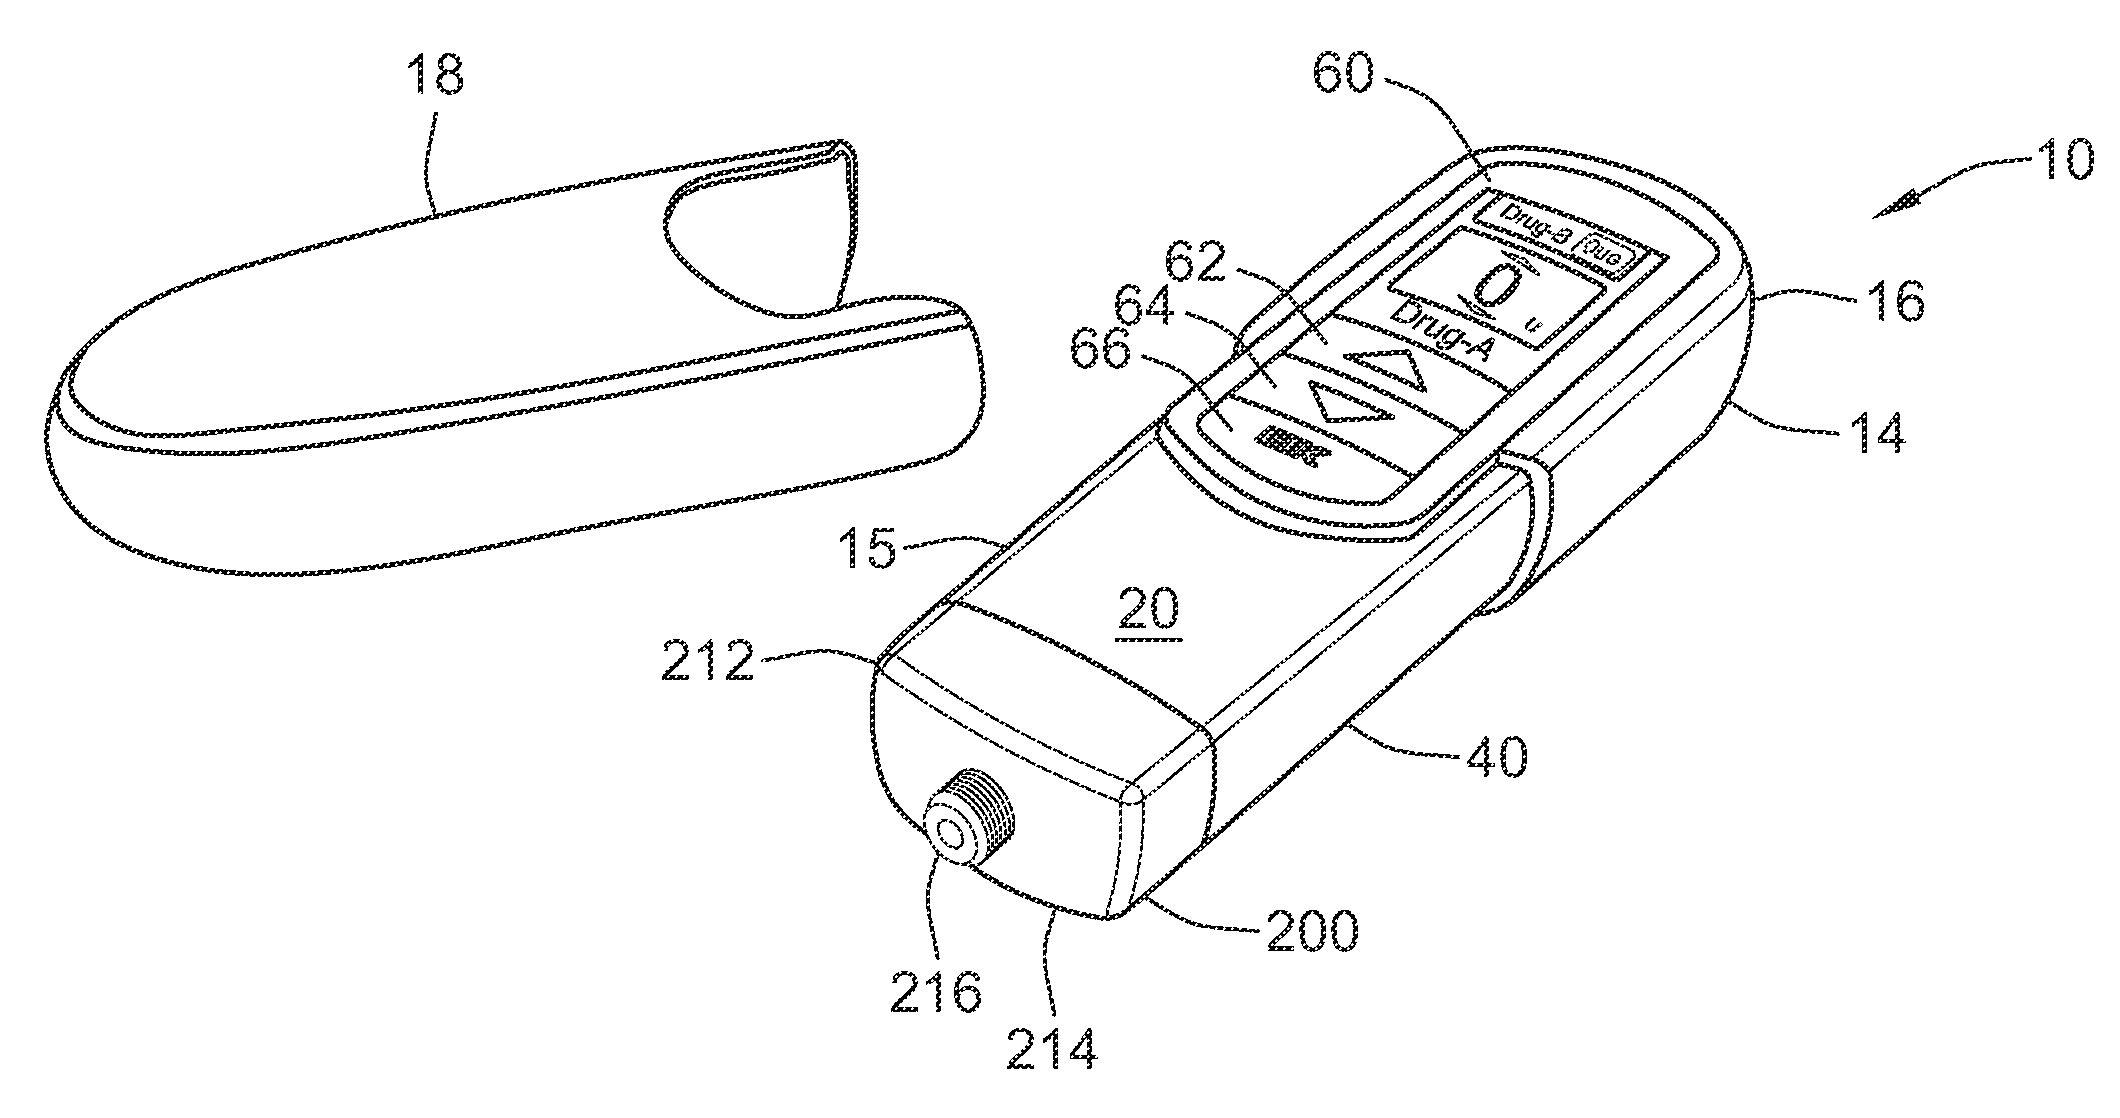 Electro-mechanical drug delivery device